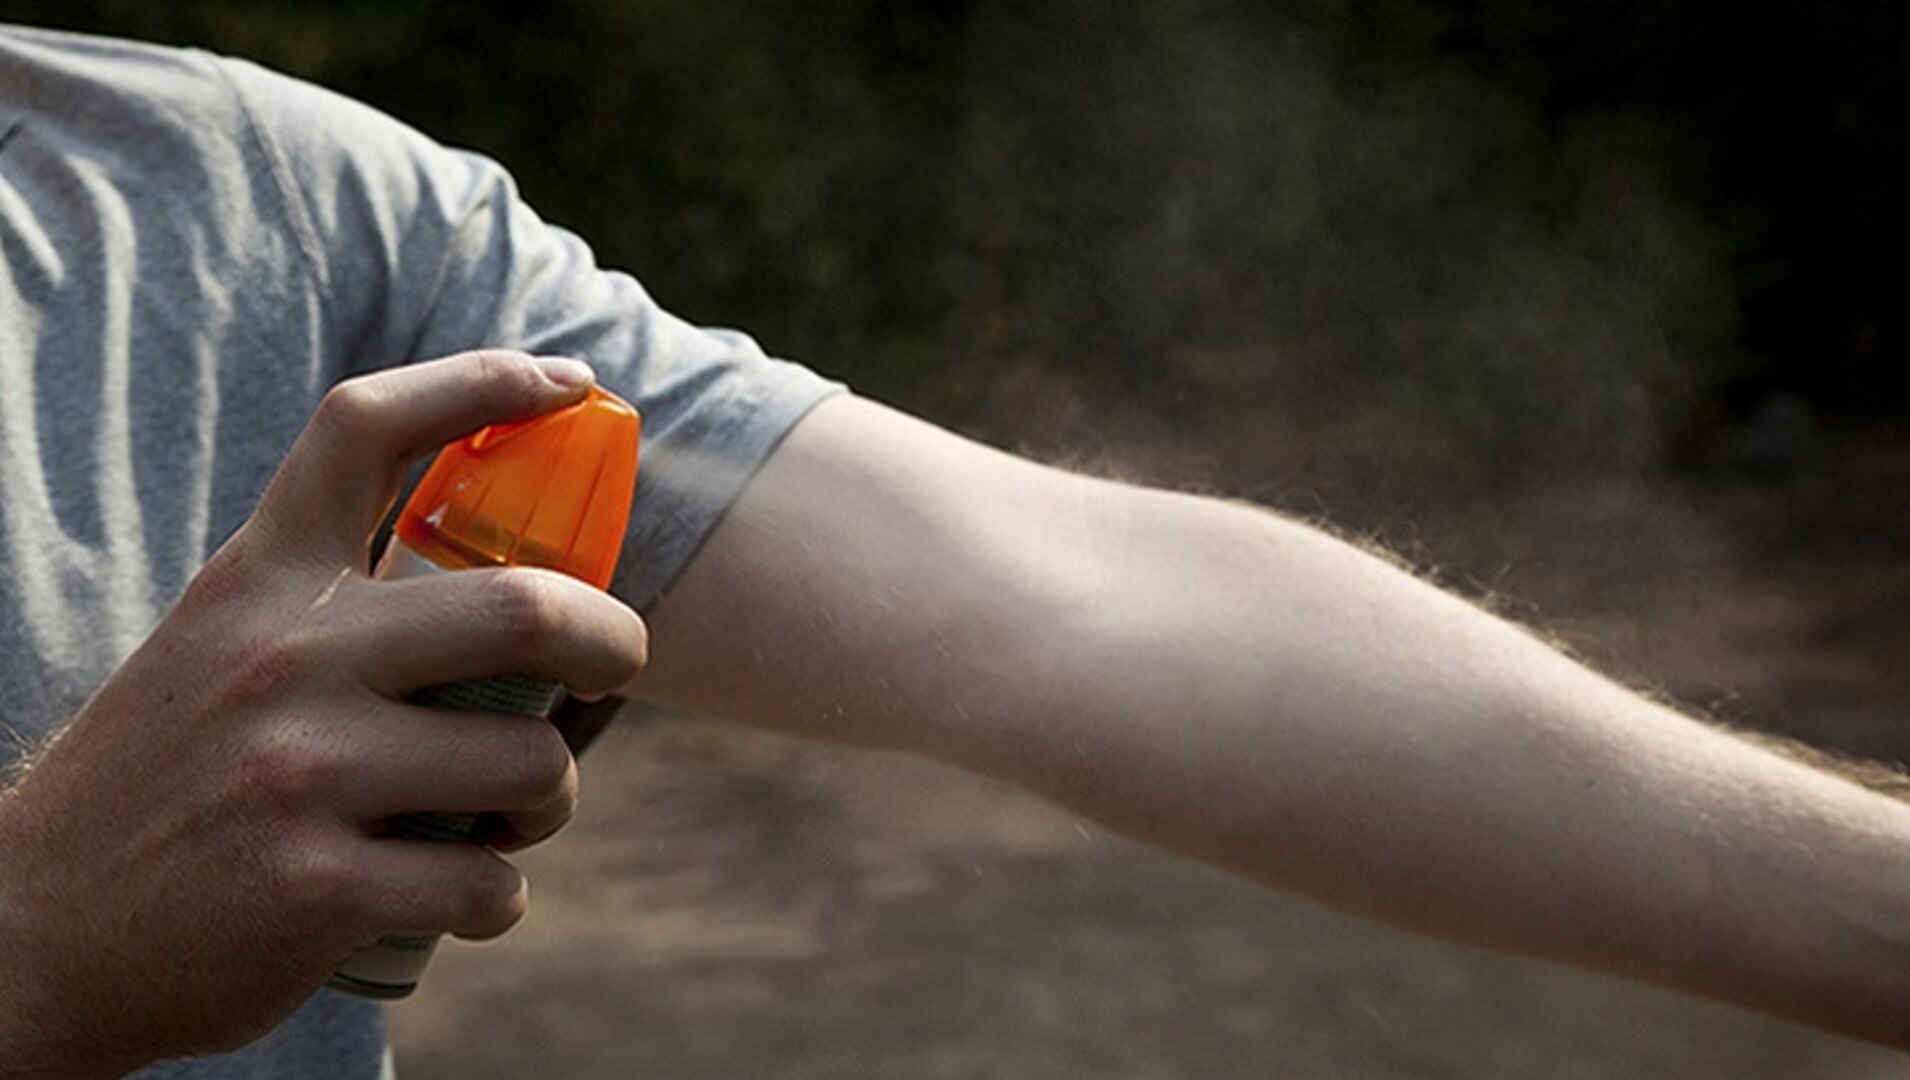 According to the EPA, using the right insect repellent can discourage mosquitoes, ticks, and other insects from landing on you and biting you.